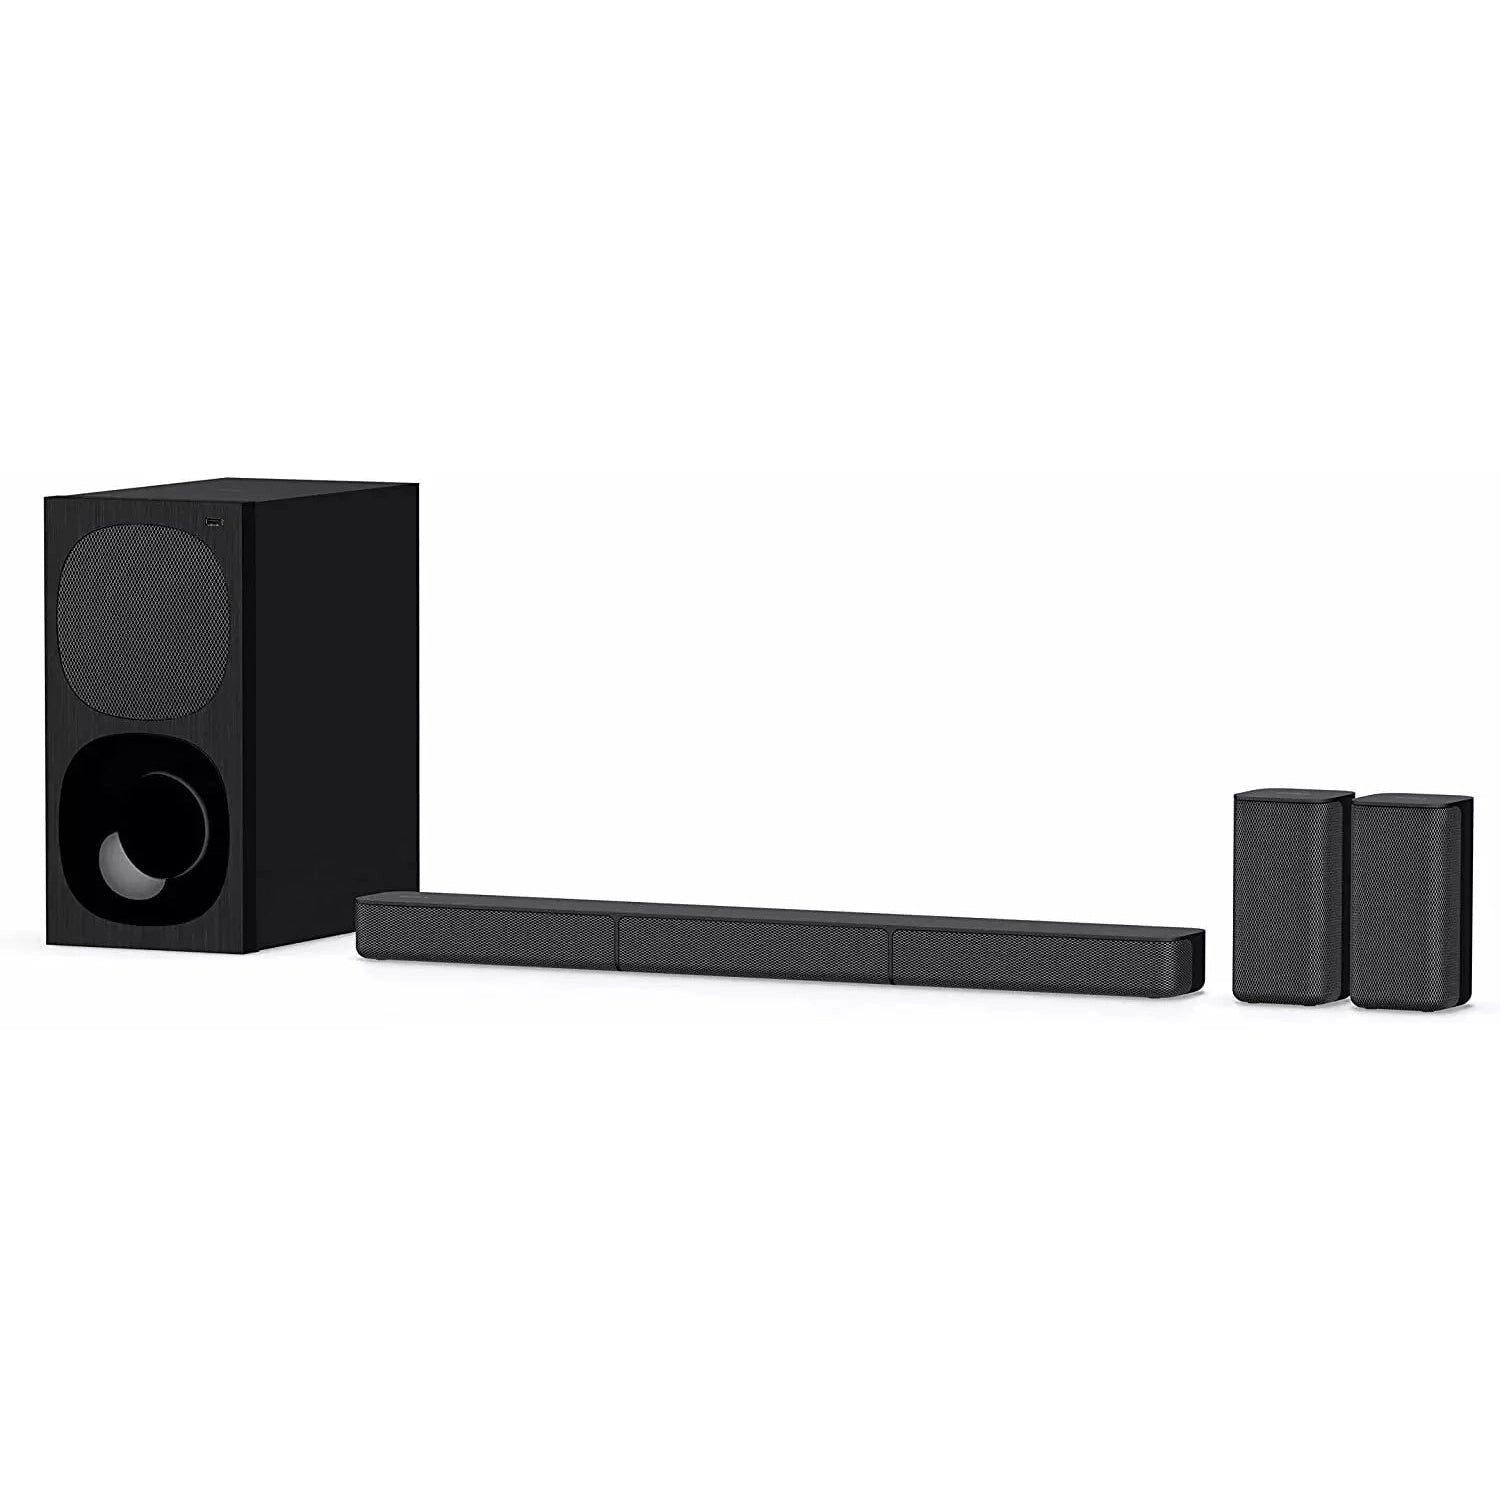 Sony HT-S20R 5.1Ch Sound Bar with Subwoofer, Black